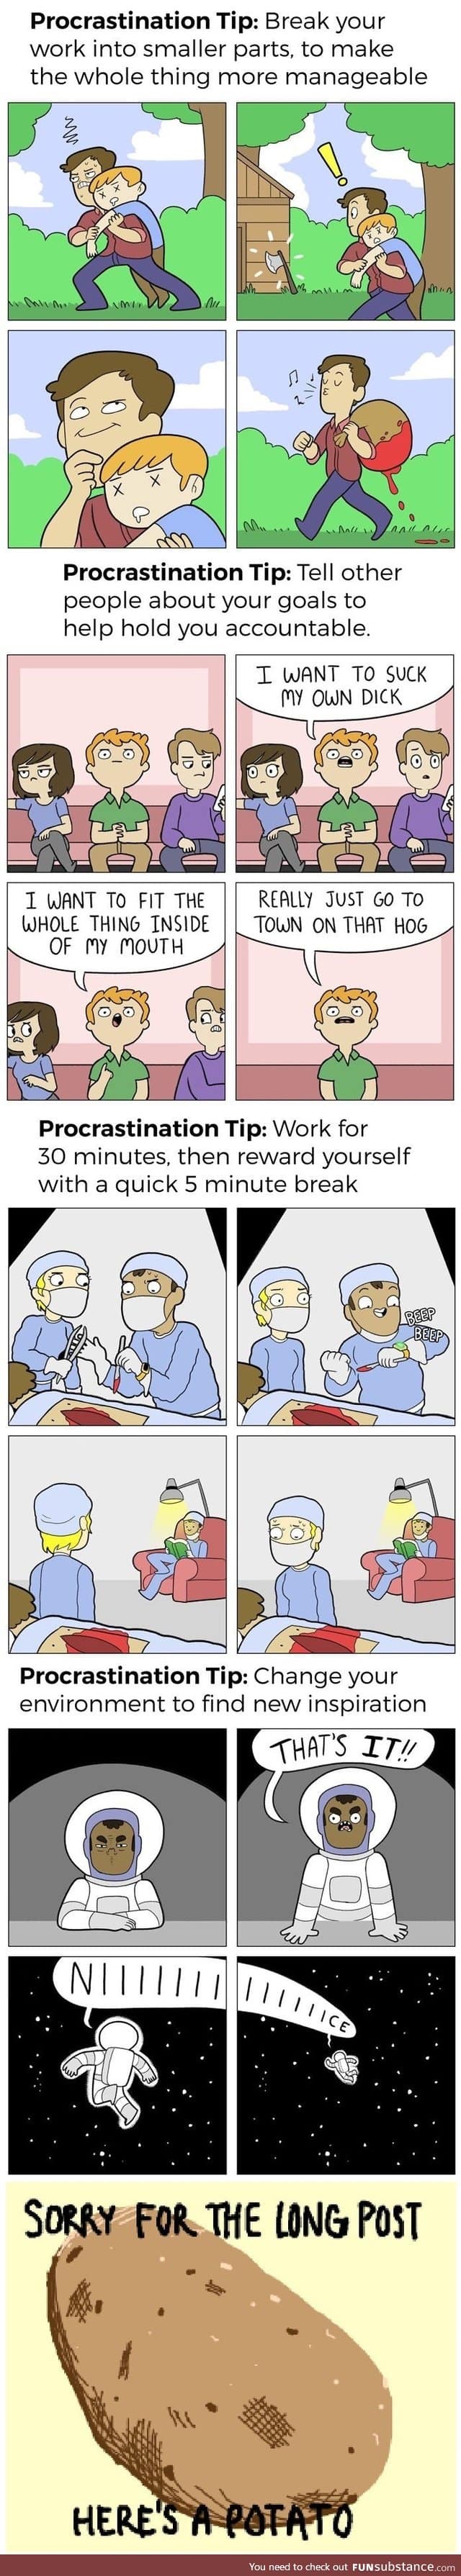 How to cure procrastination. A guide made easy